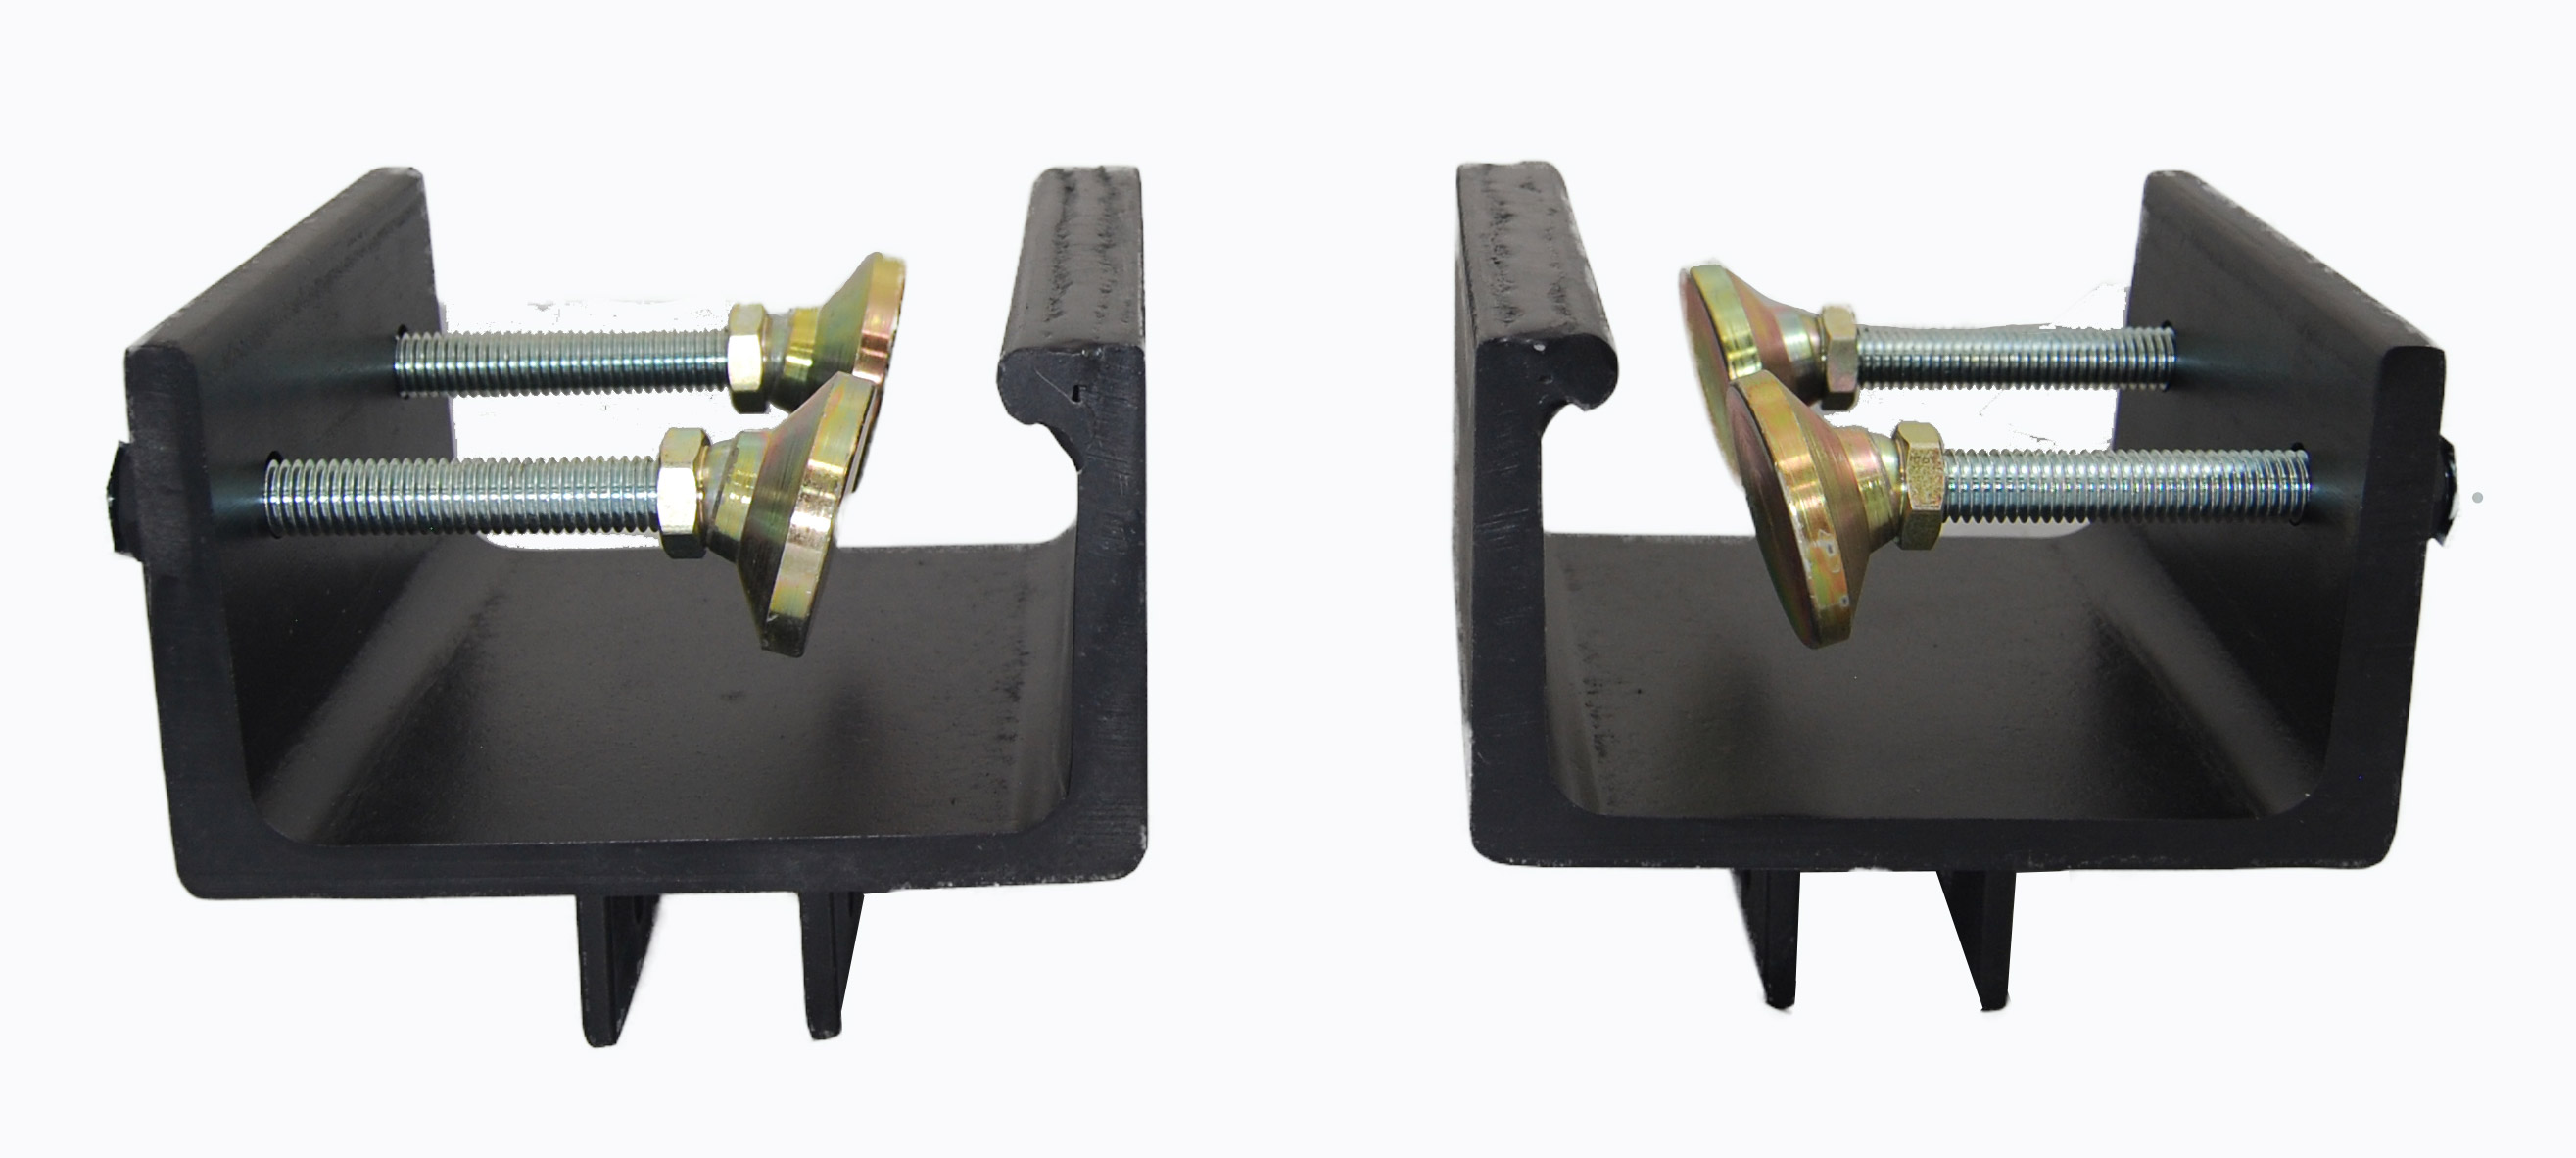 Uni-Dolly Frame Clamps